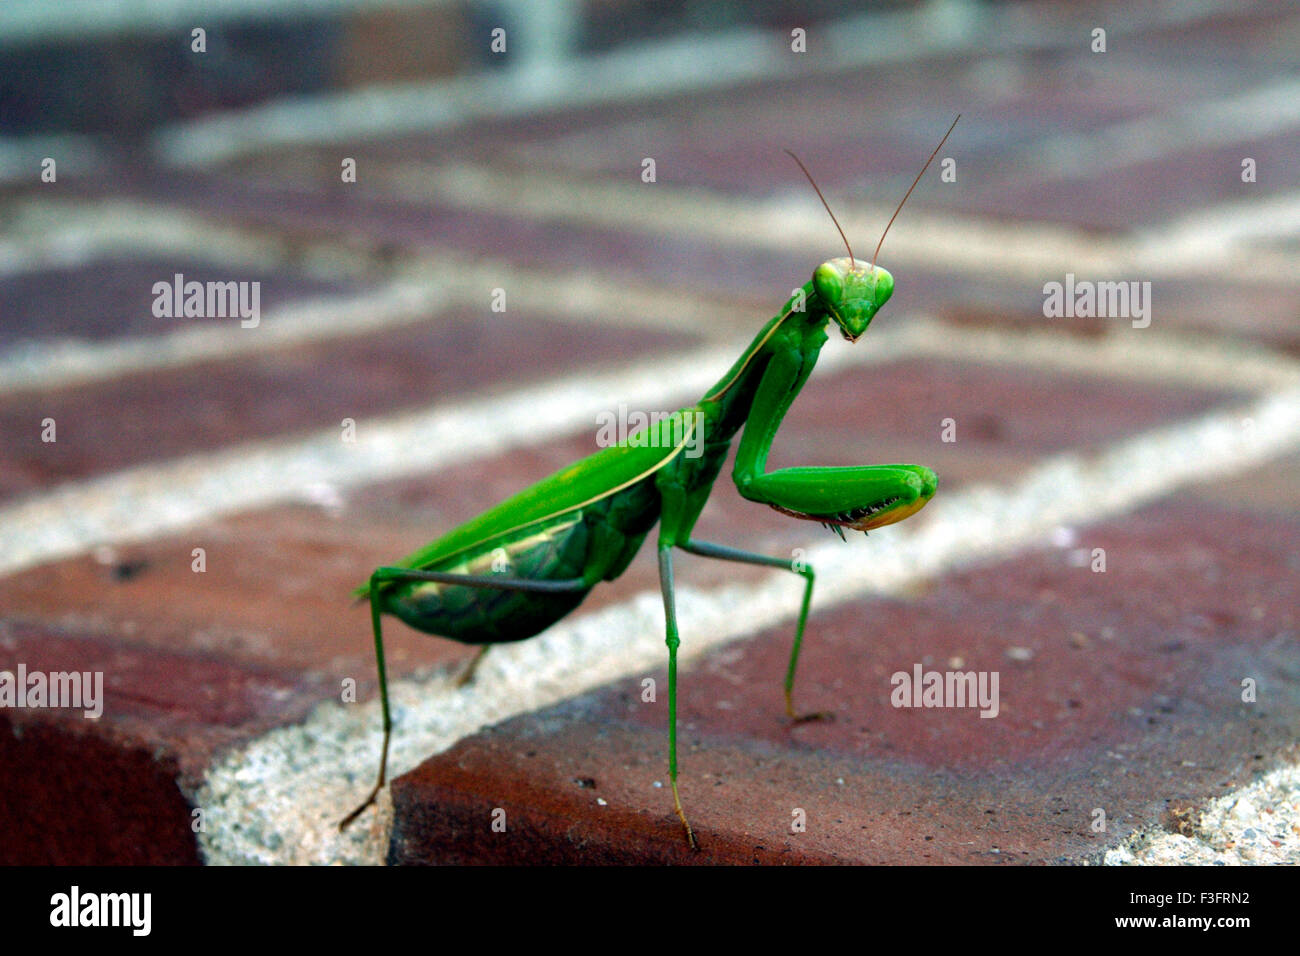 Insects ; Mantis feeding called Pest Controller or Green Friend Stock Photo